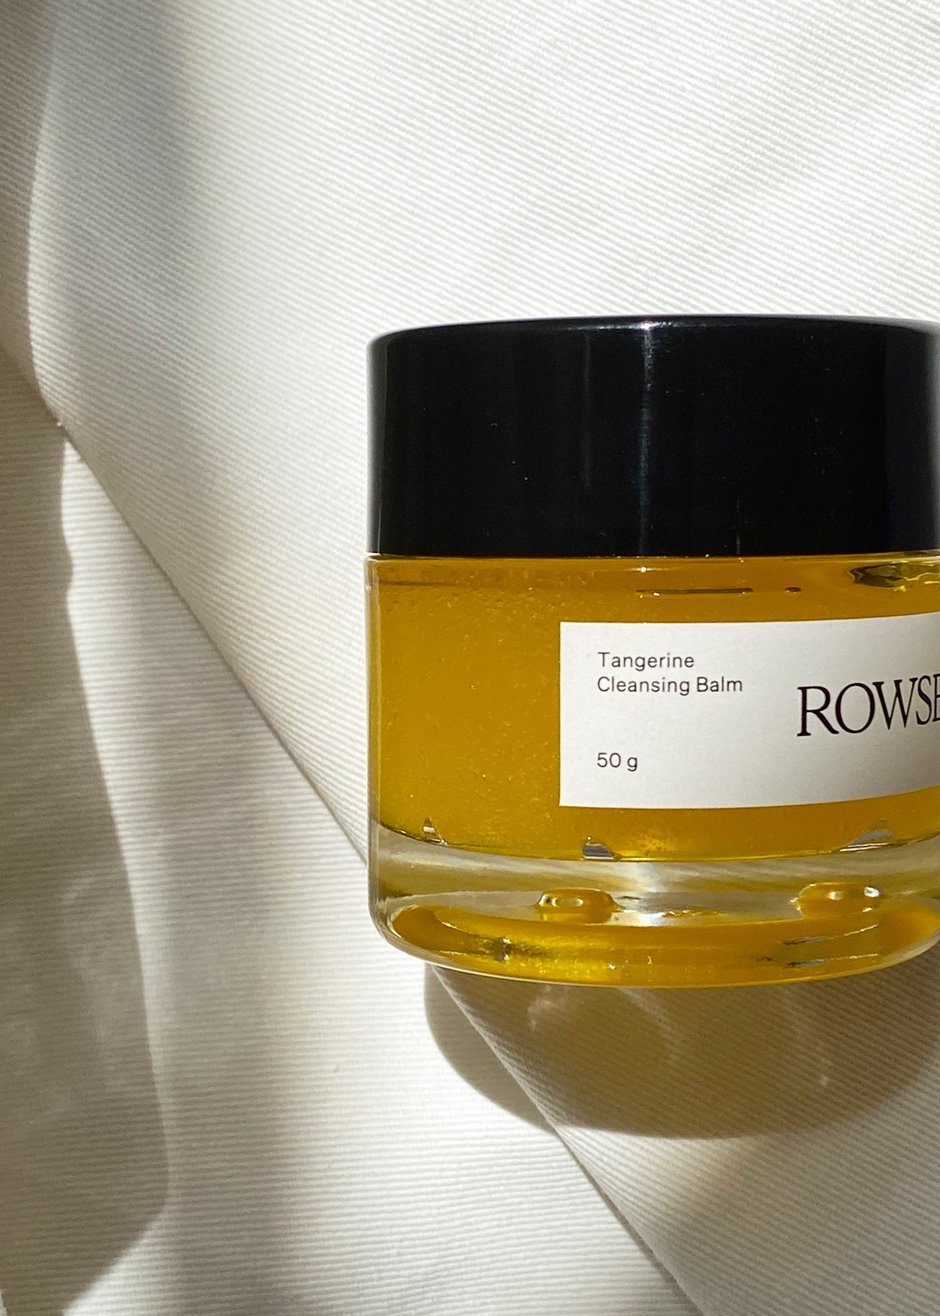 ROWSE x TFS Tangerine Cleansing Balm - 4